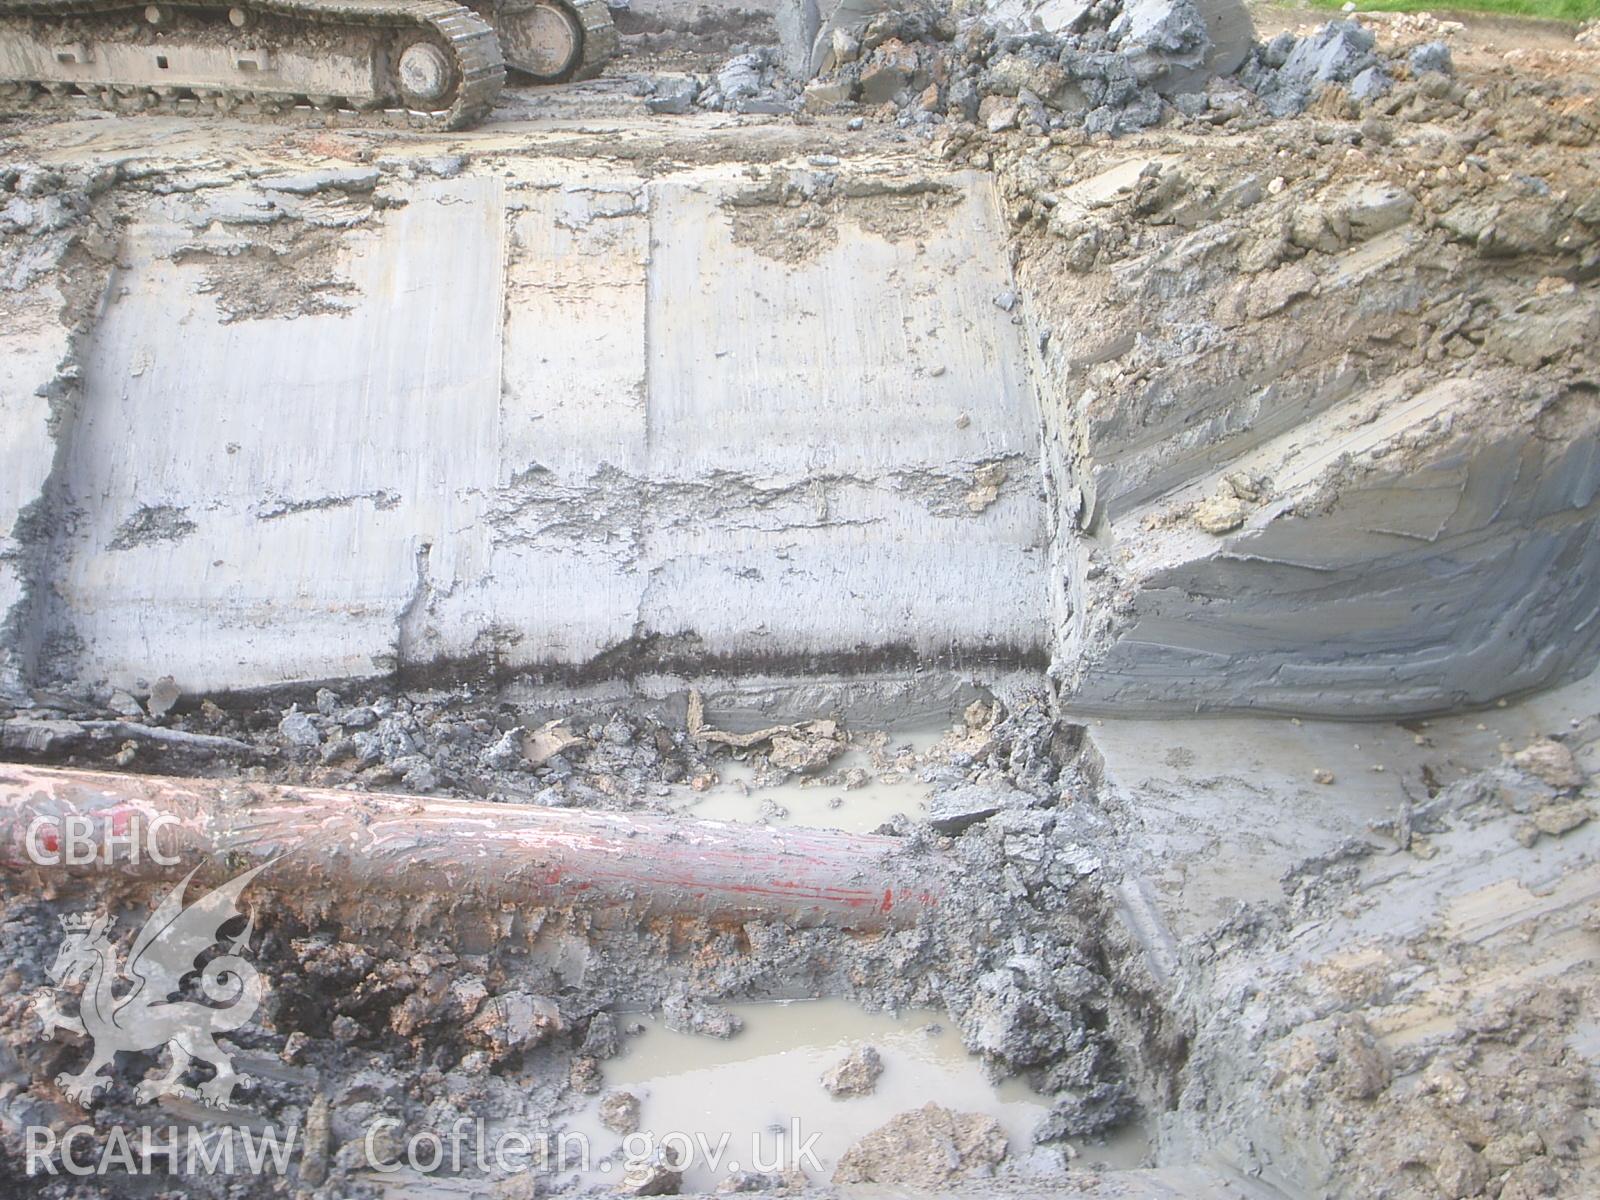 Colour digital photograph showing a tie-in trench, from the South.